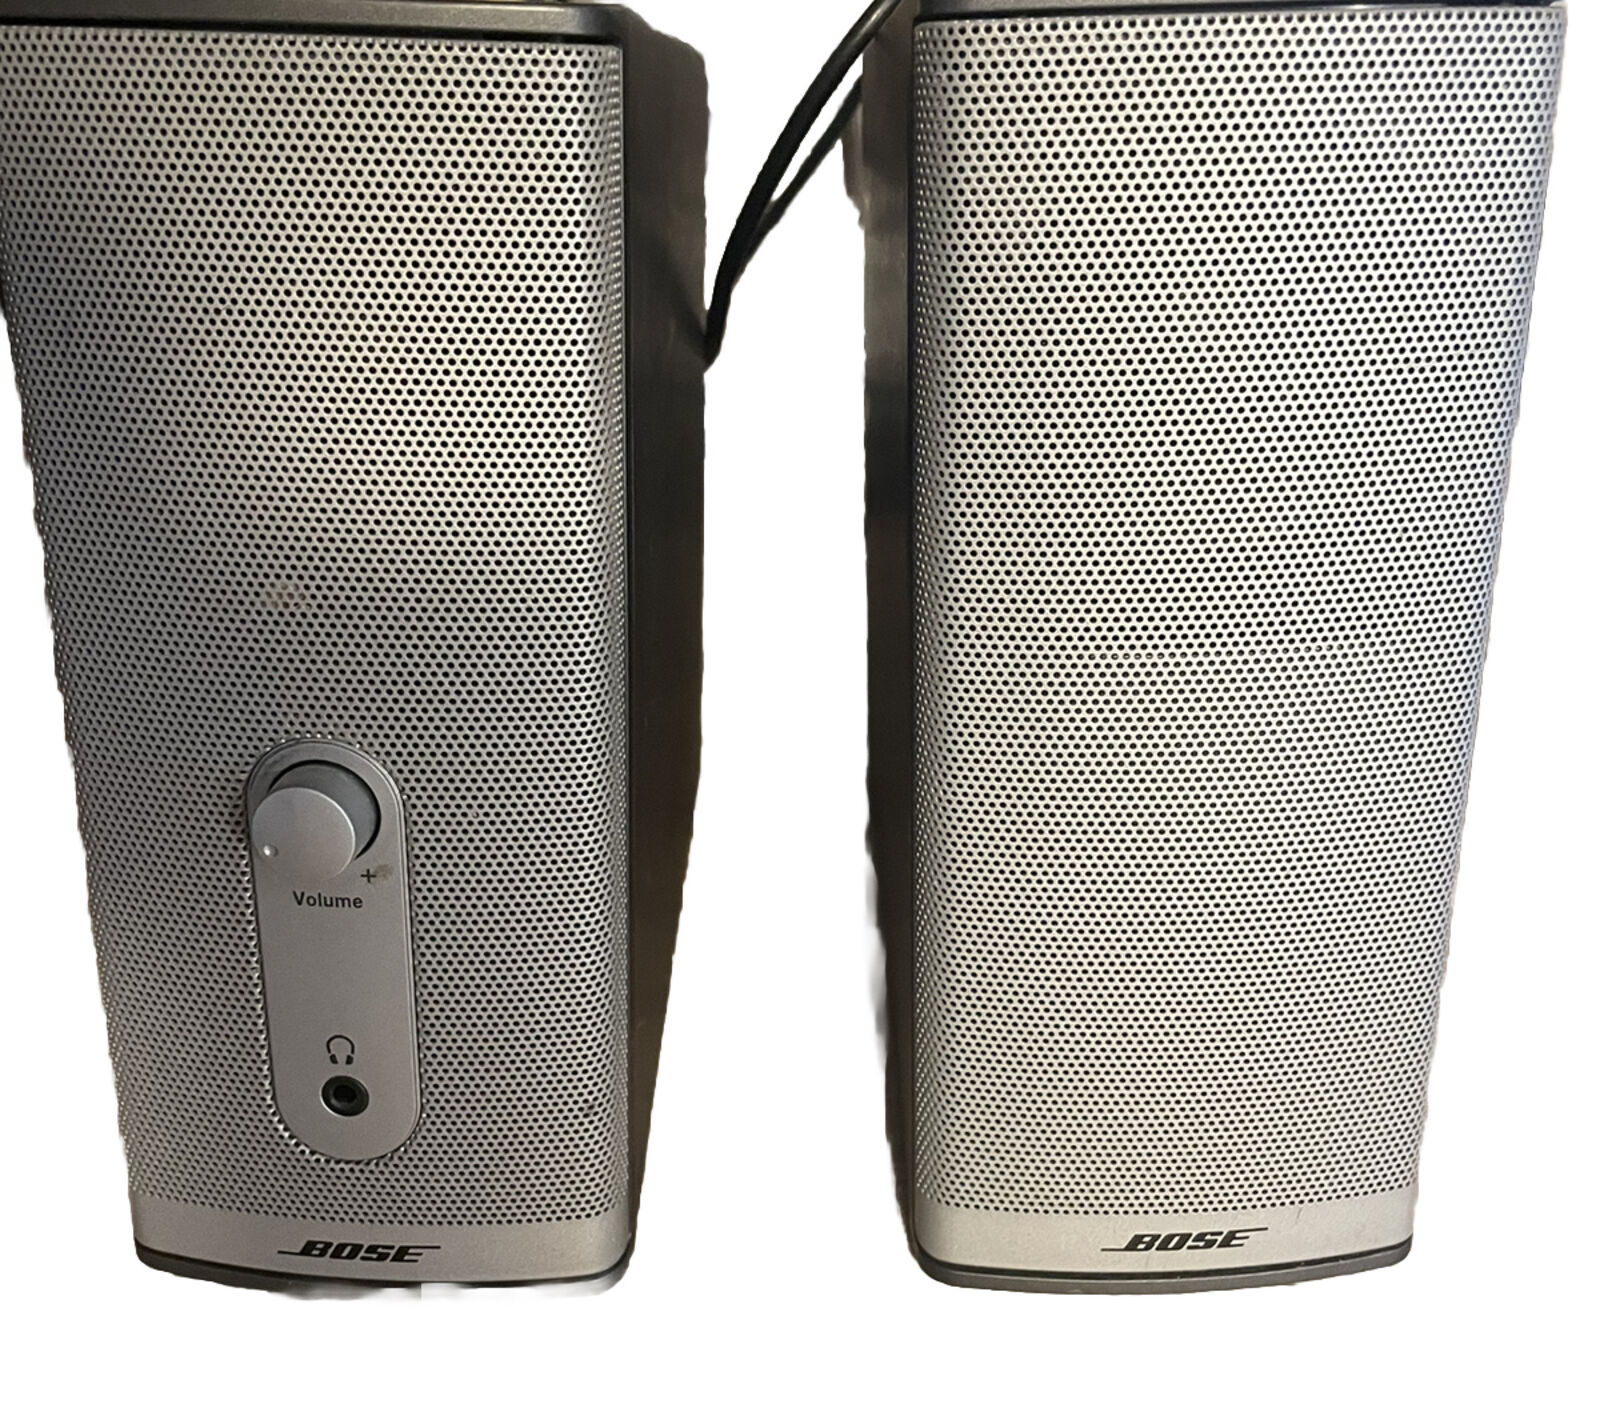 A Pair Of Bose Companion 2 Series II Multimedia Stereo Computer Speakers